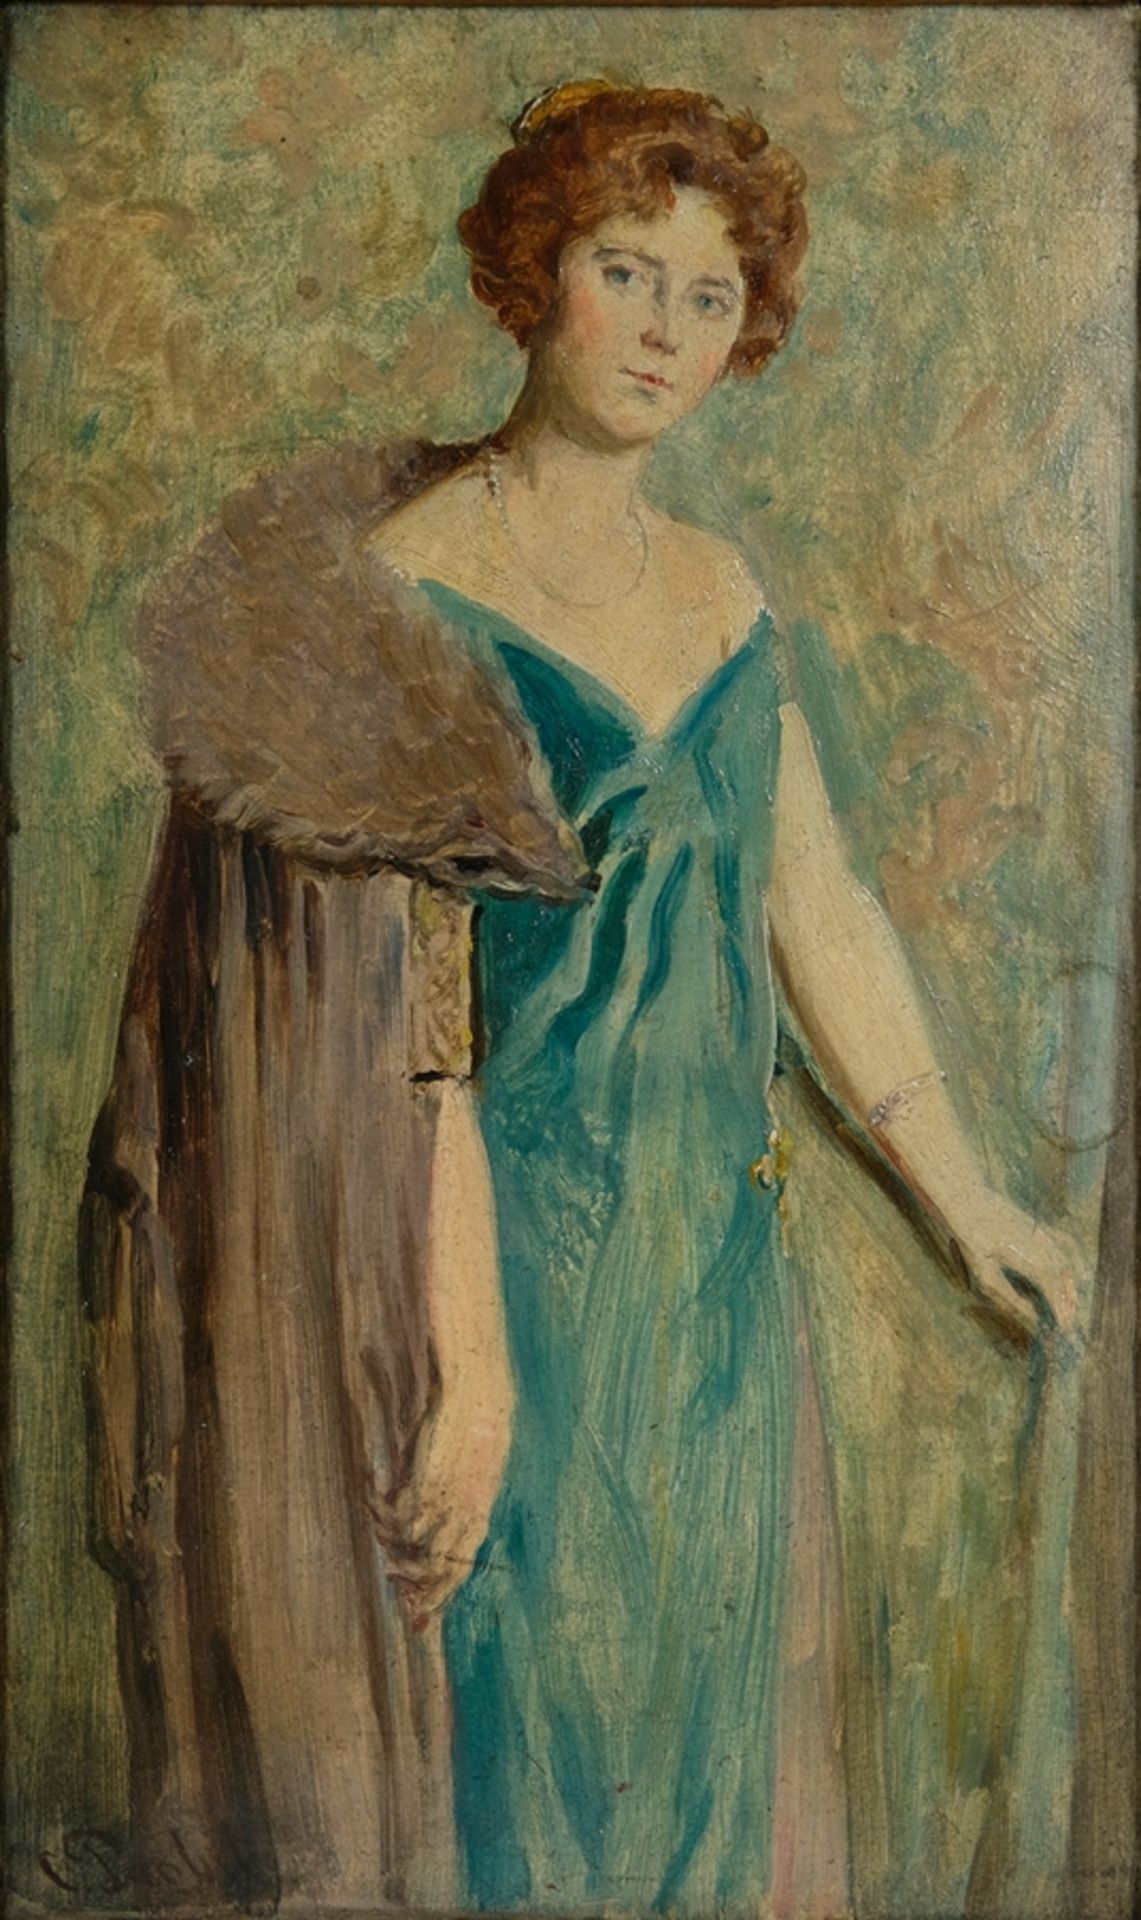 Probst, Carl (1854-1924) Lady in a robe, around 1910/20, oil on card.